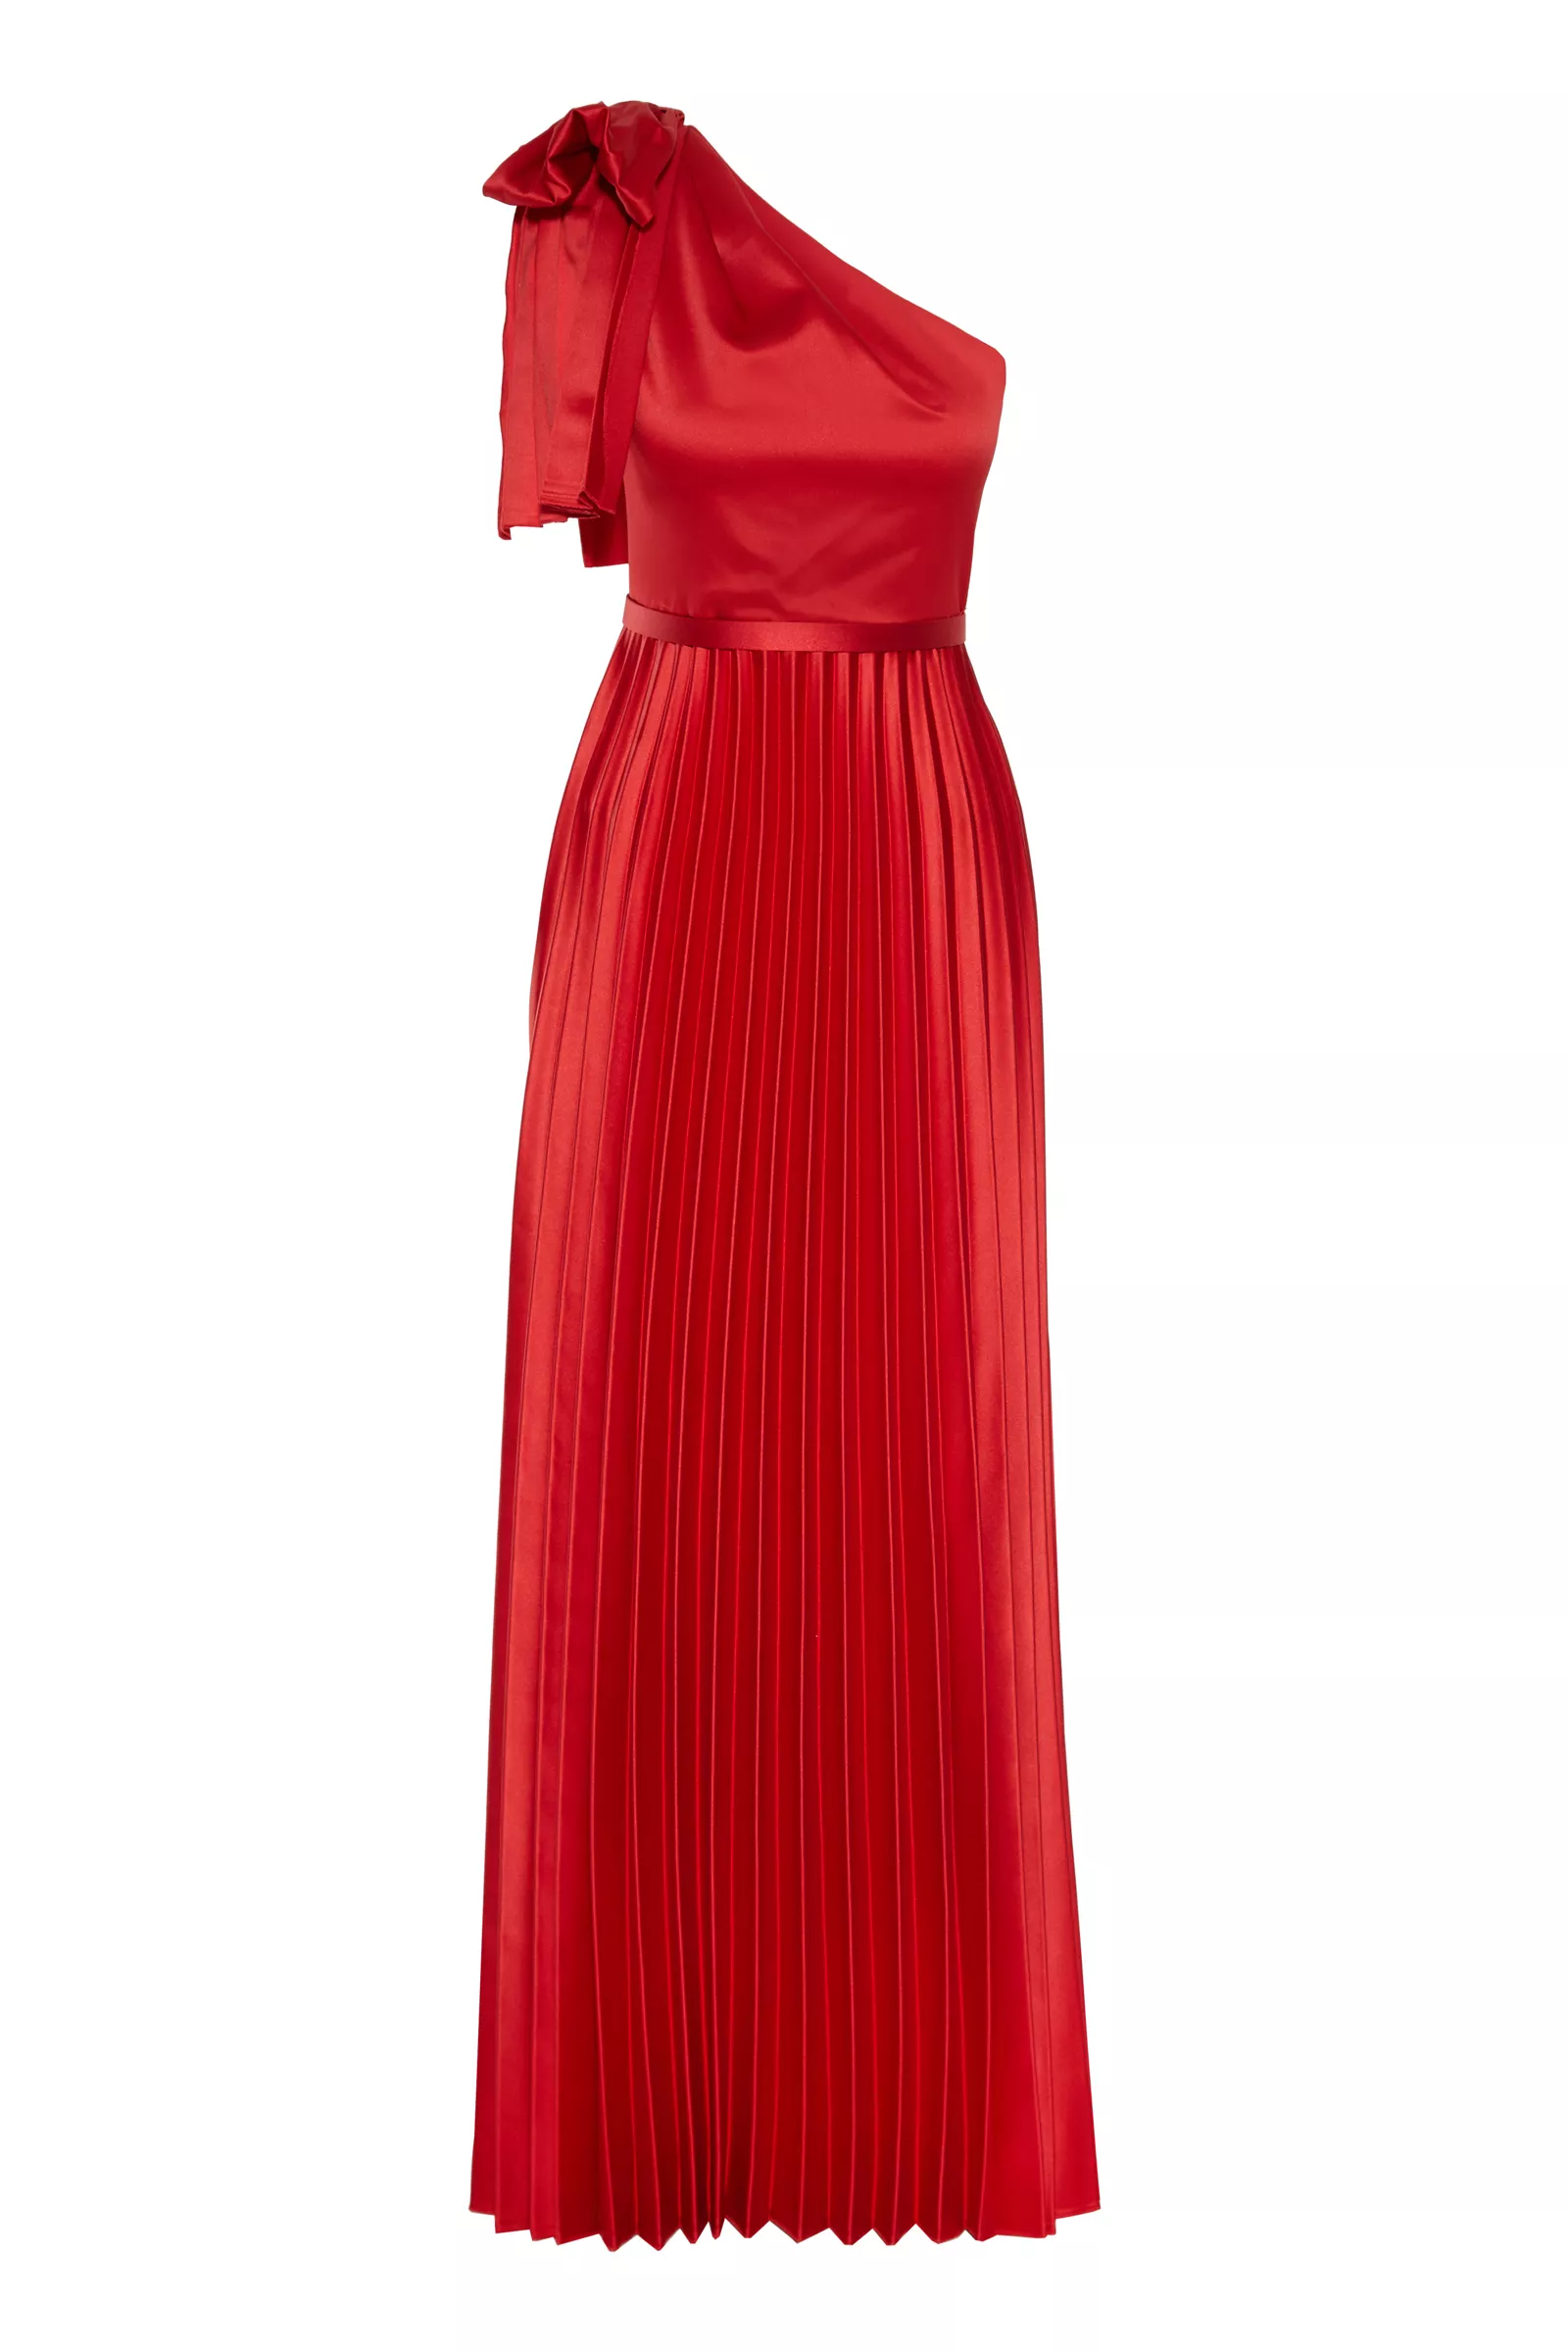 Red satin one arm long dress